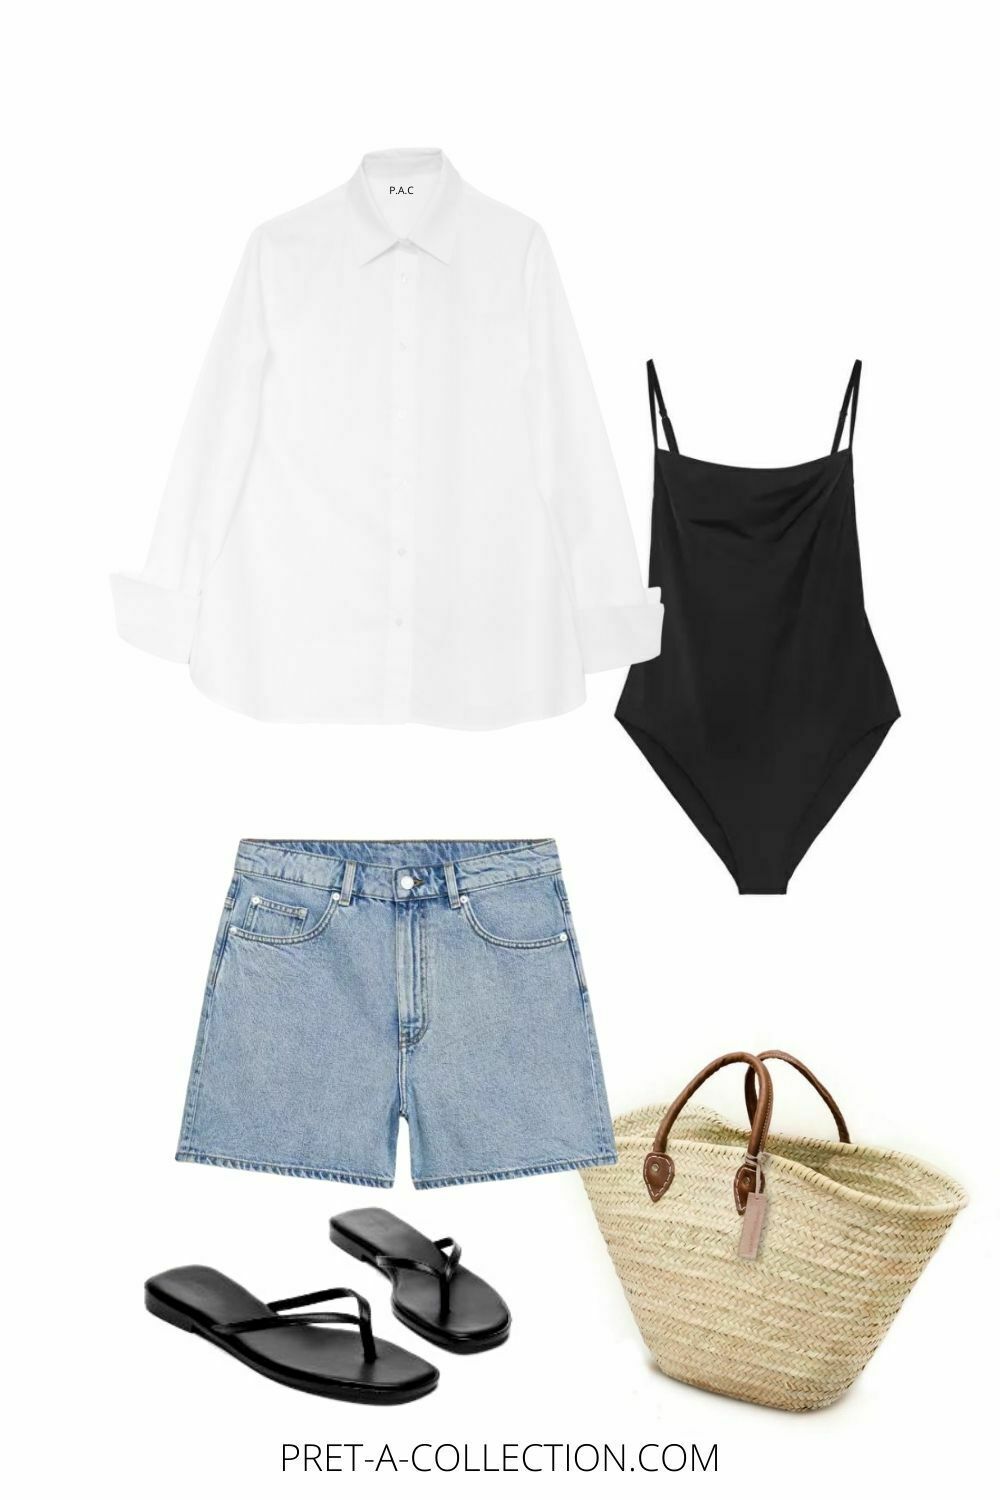 How to wear a white shirt in summer